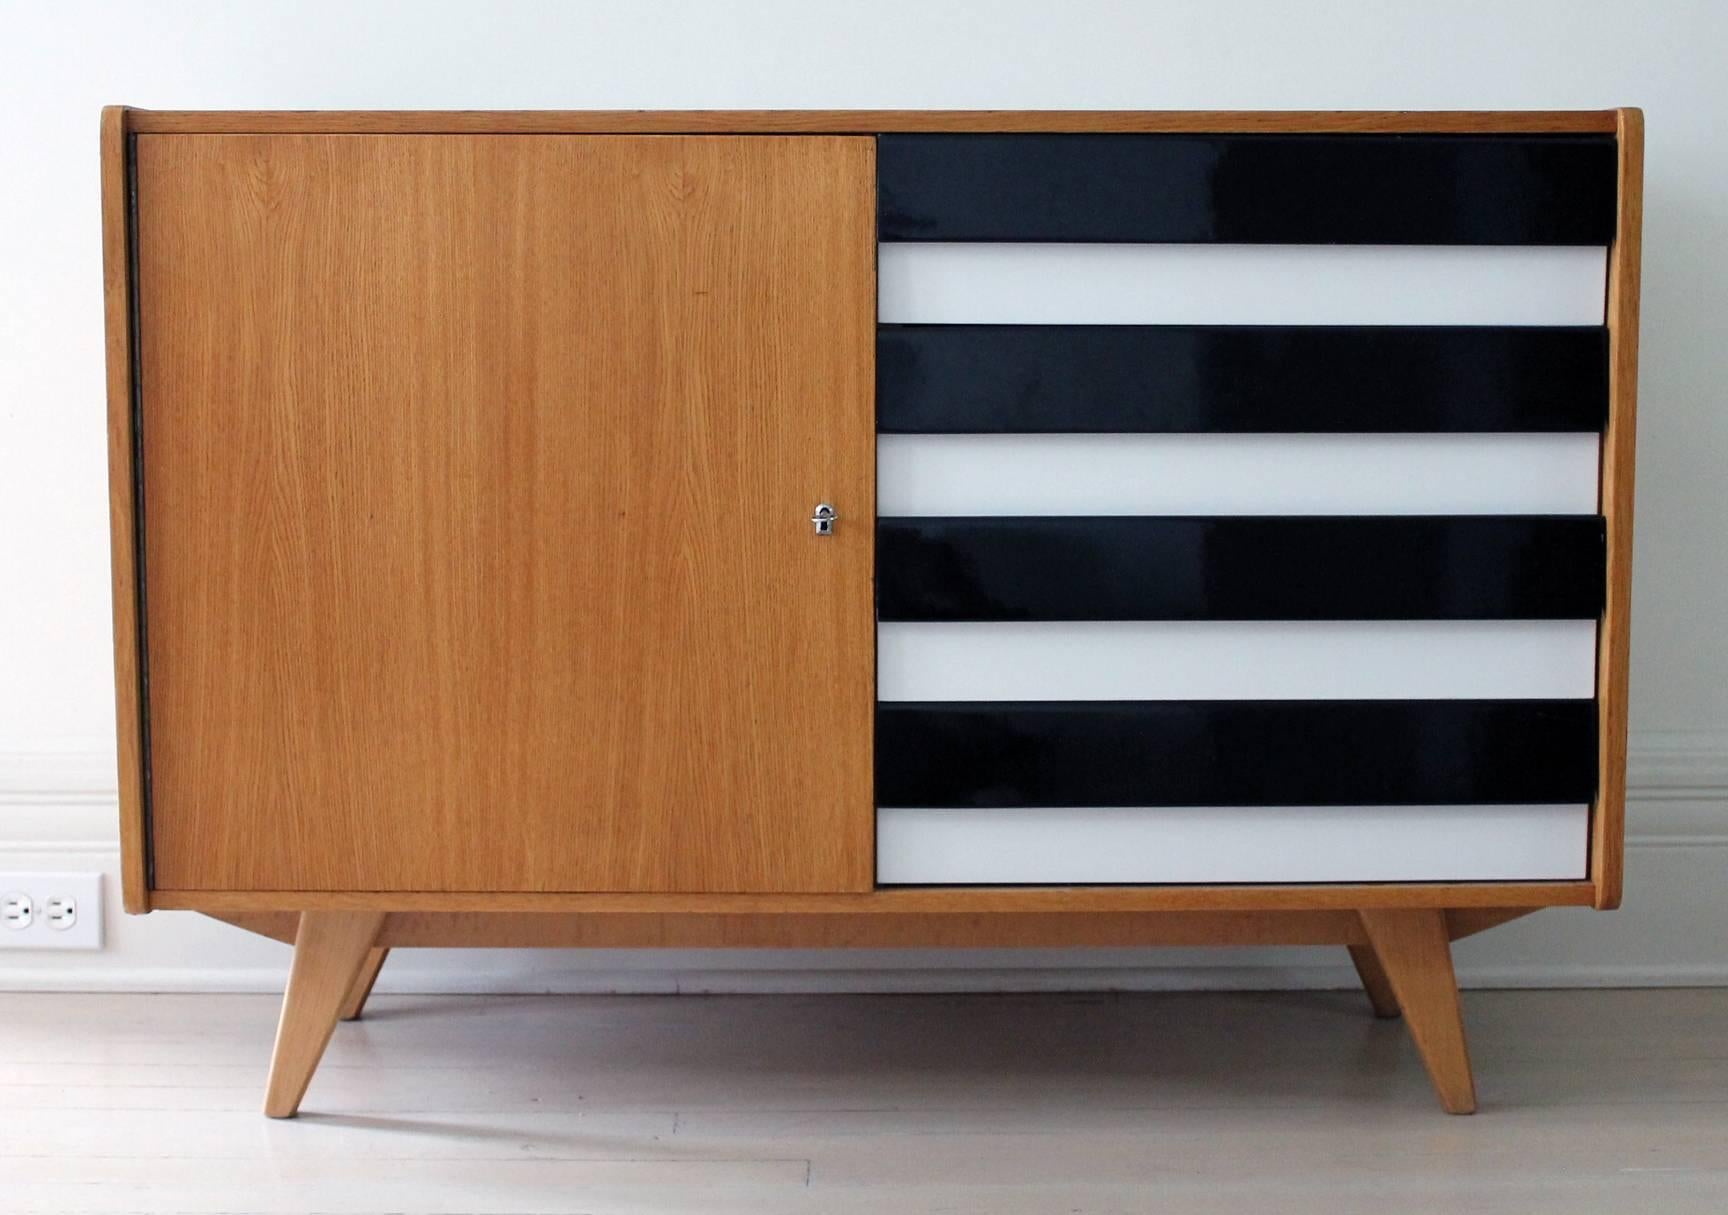 Ash credenza designed by Jiri Jiroutek for Interier Praha. High gloss black and white painted wood drawers four (4) on one side and doors with a locked compartment on the other side.